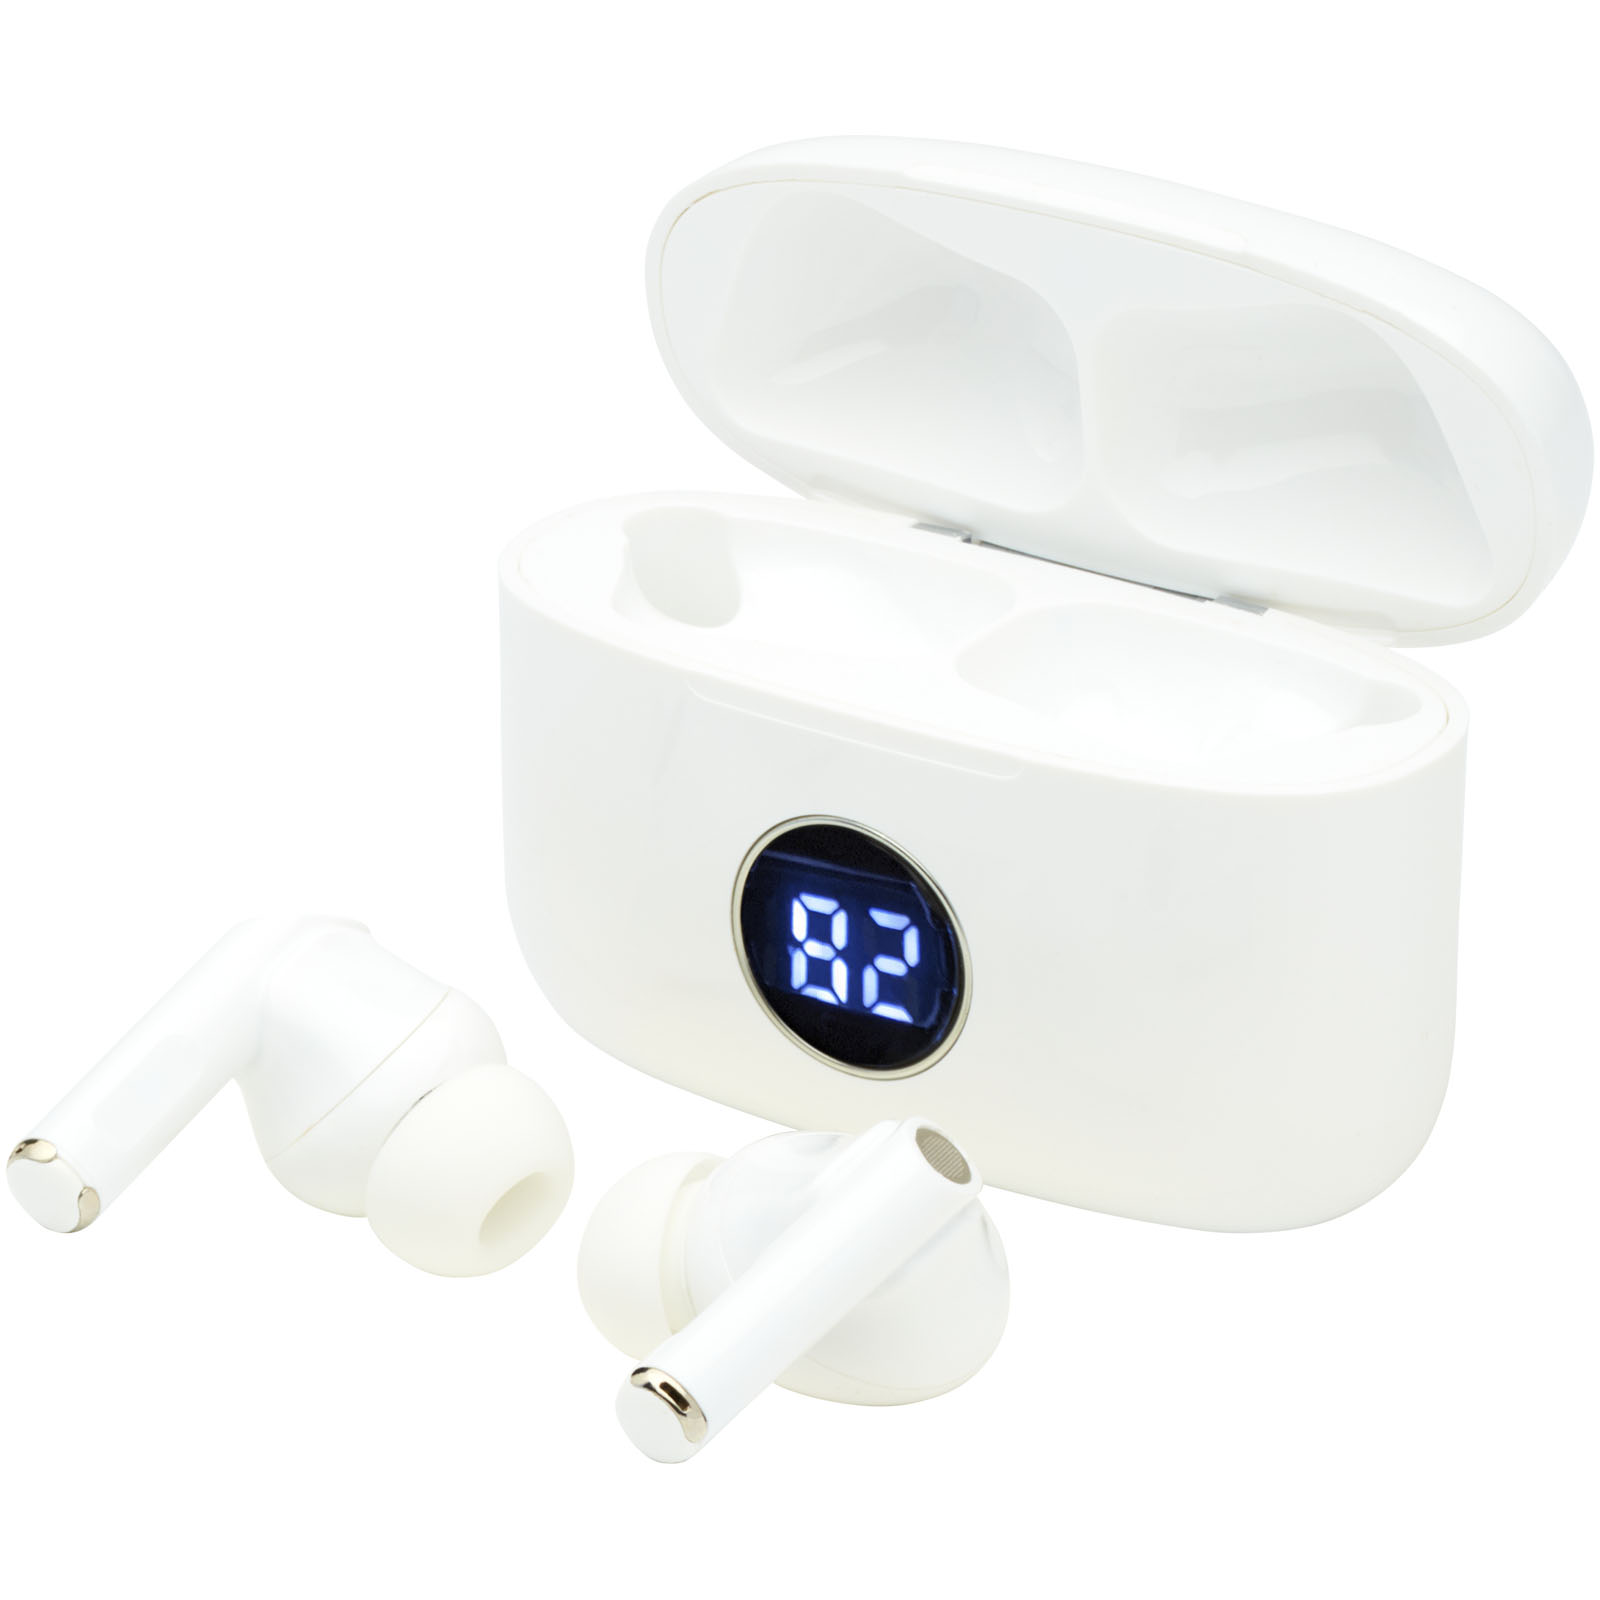 Earbuds - Anton Evo ANC earbuds